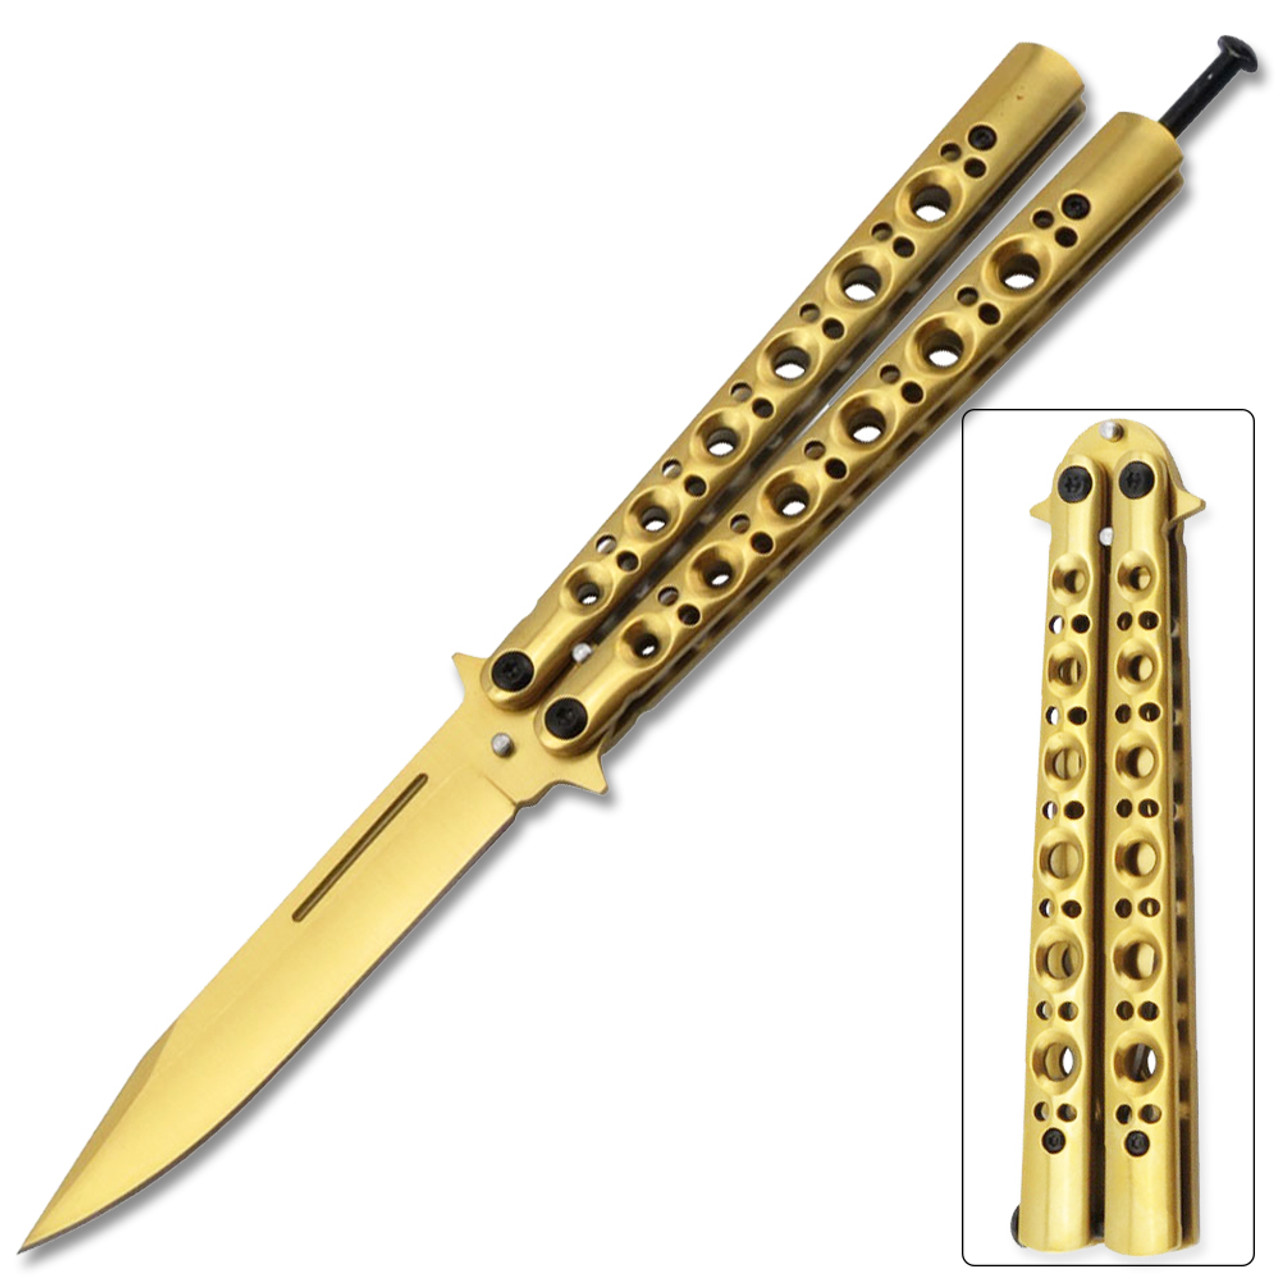 High Quality Balisong Butterfly Knife Nylon Sheath Case K033 Sheath Bag  Only for sale online - eBay